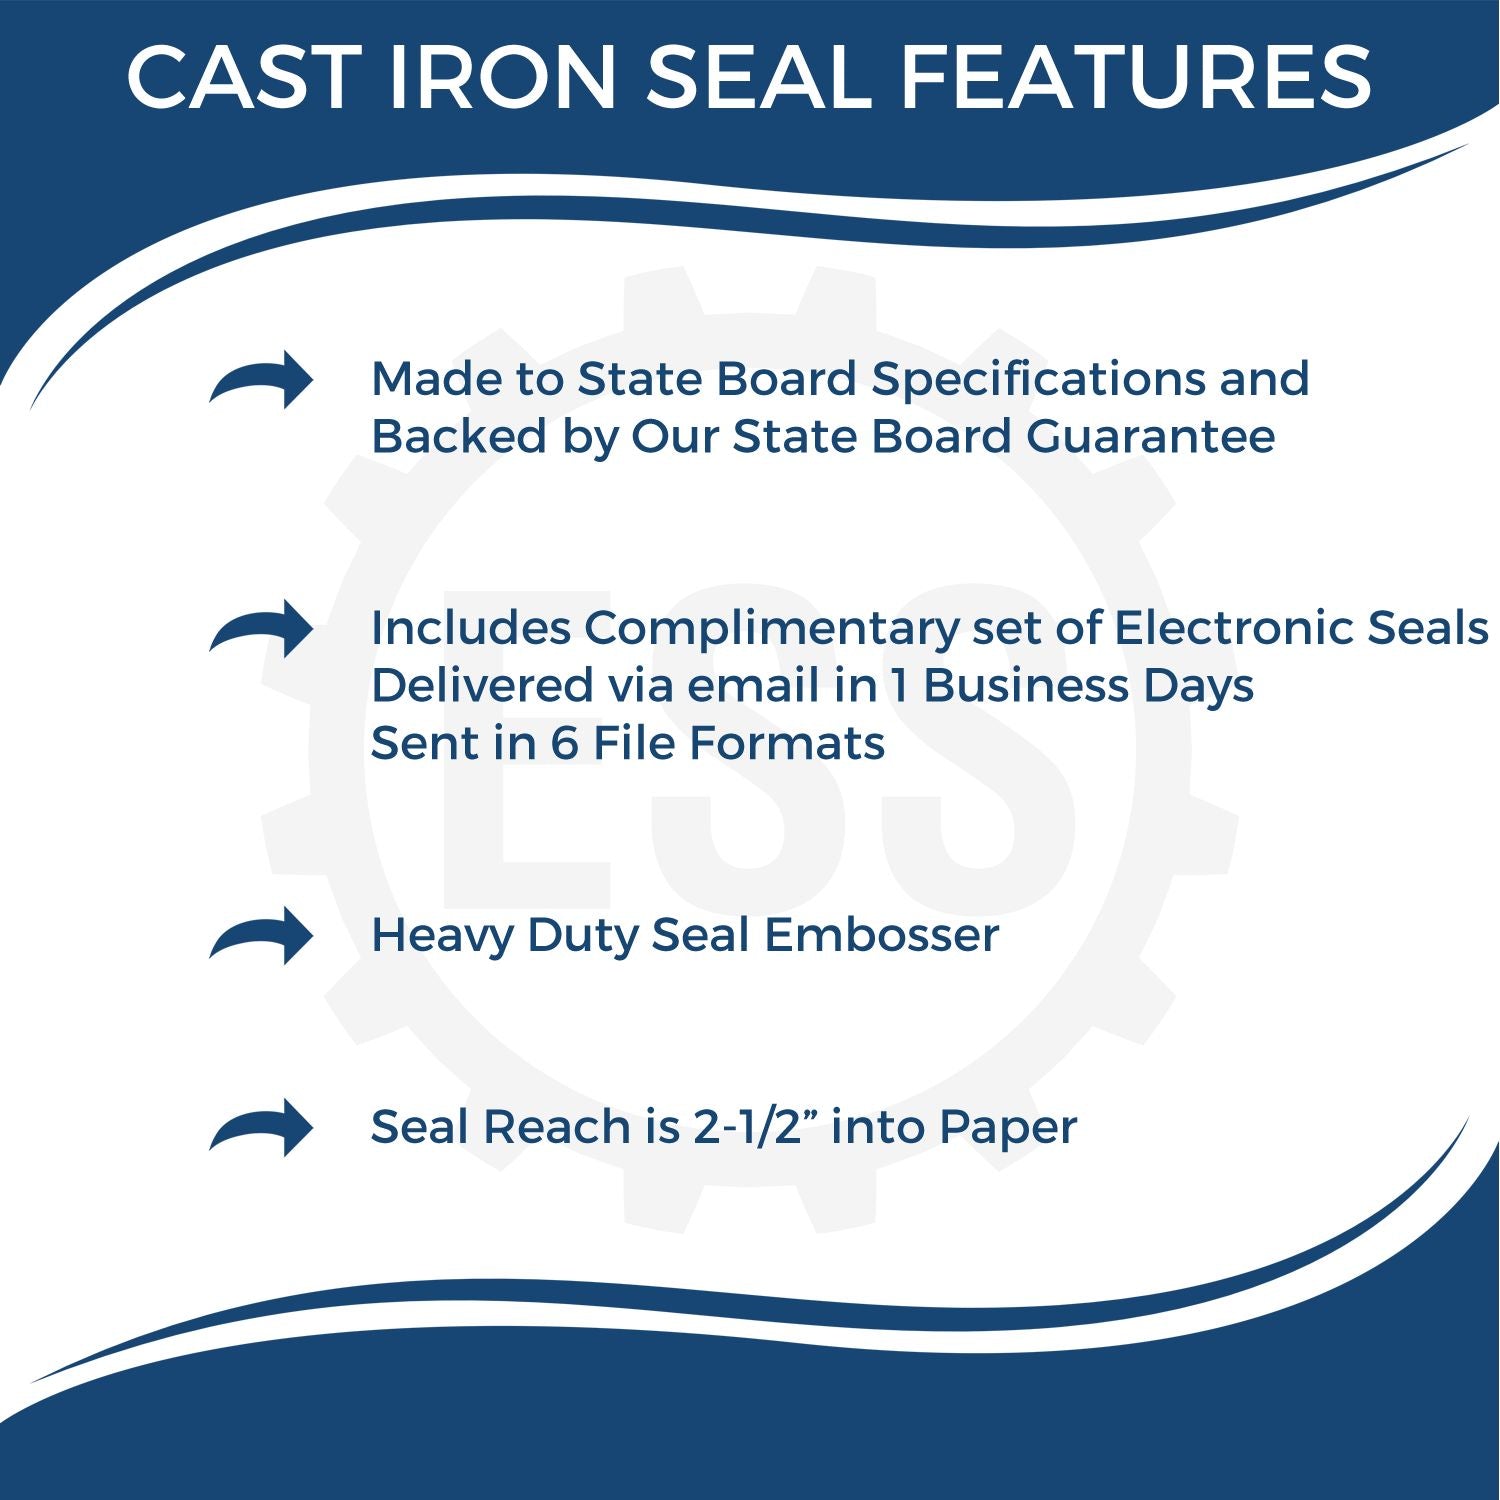 The main image for the Heavy Duty Cast Iron Montana Land Surveyor Seal Embosser depicting a sample of the imprint and electronic files